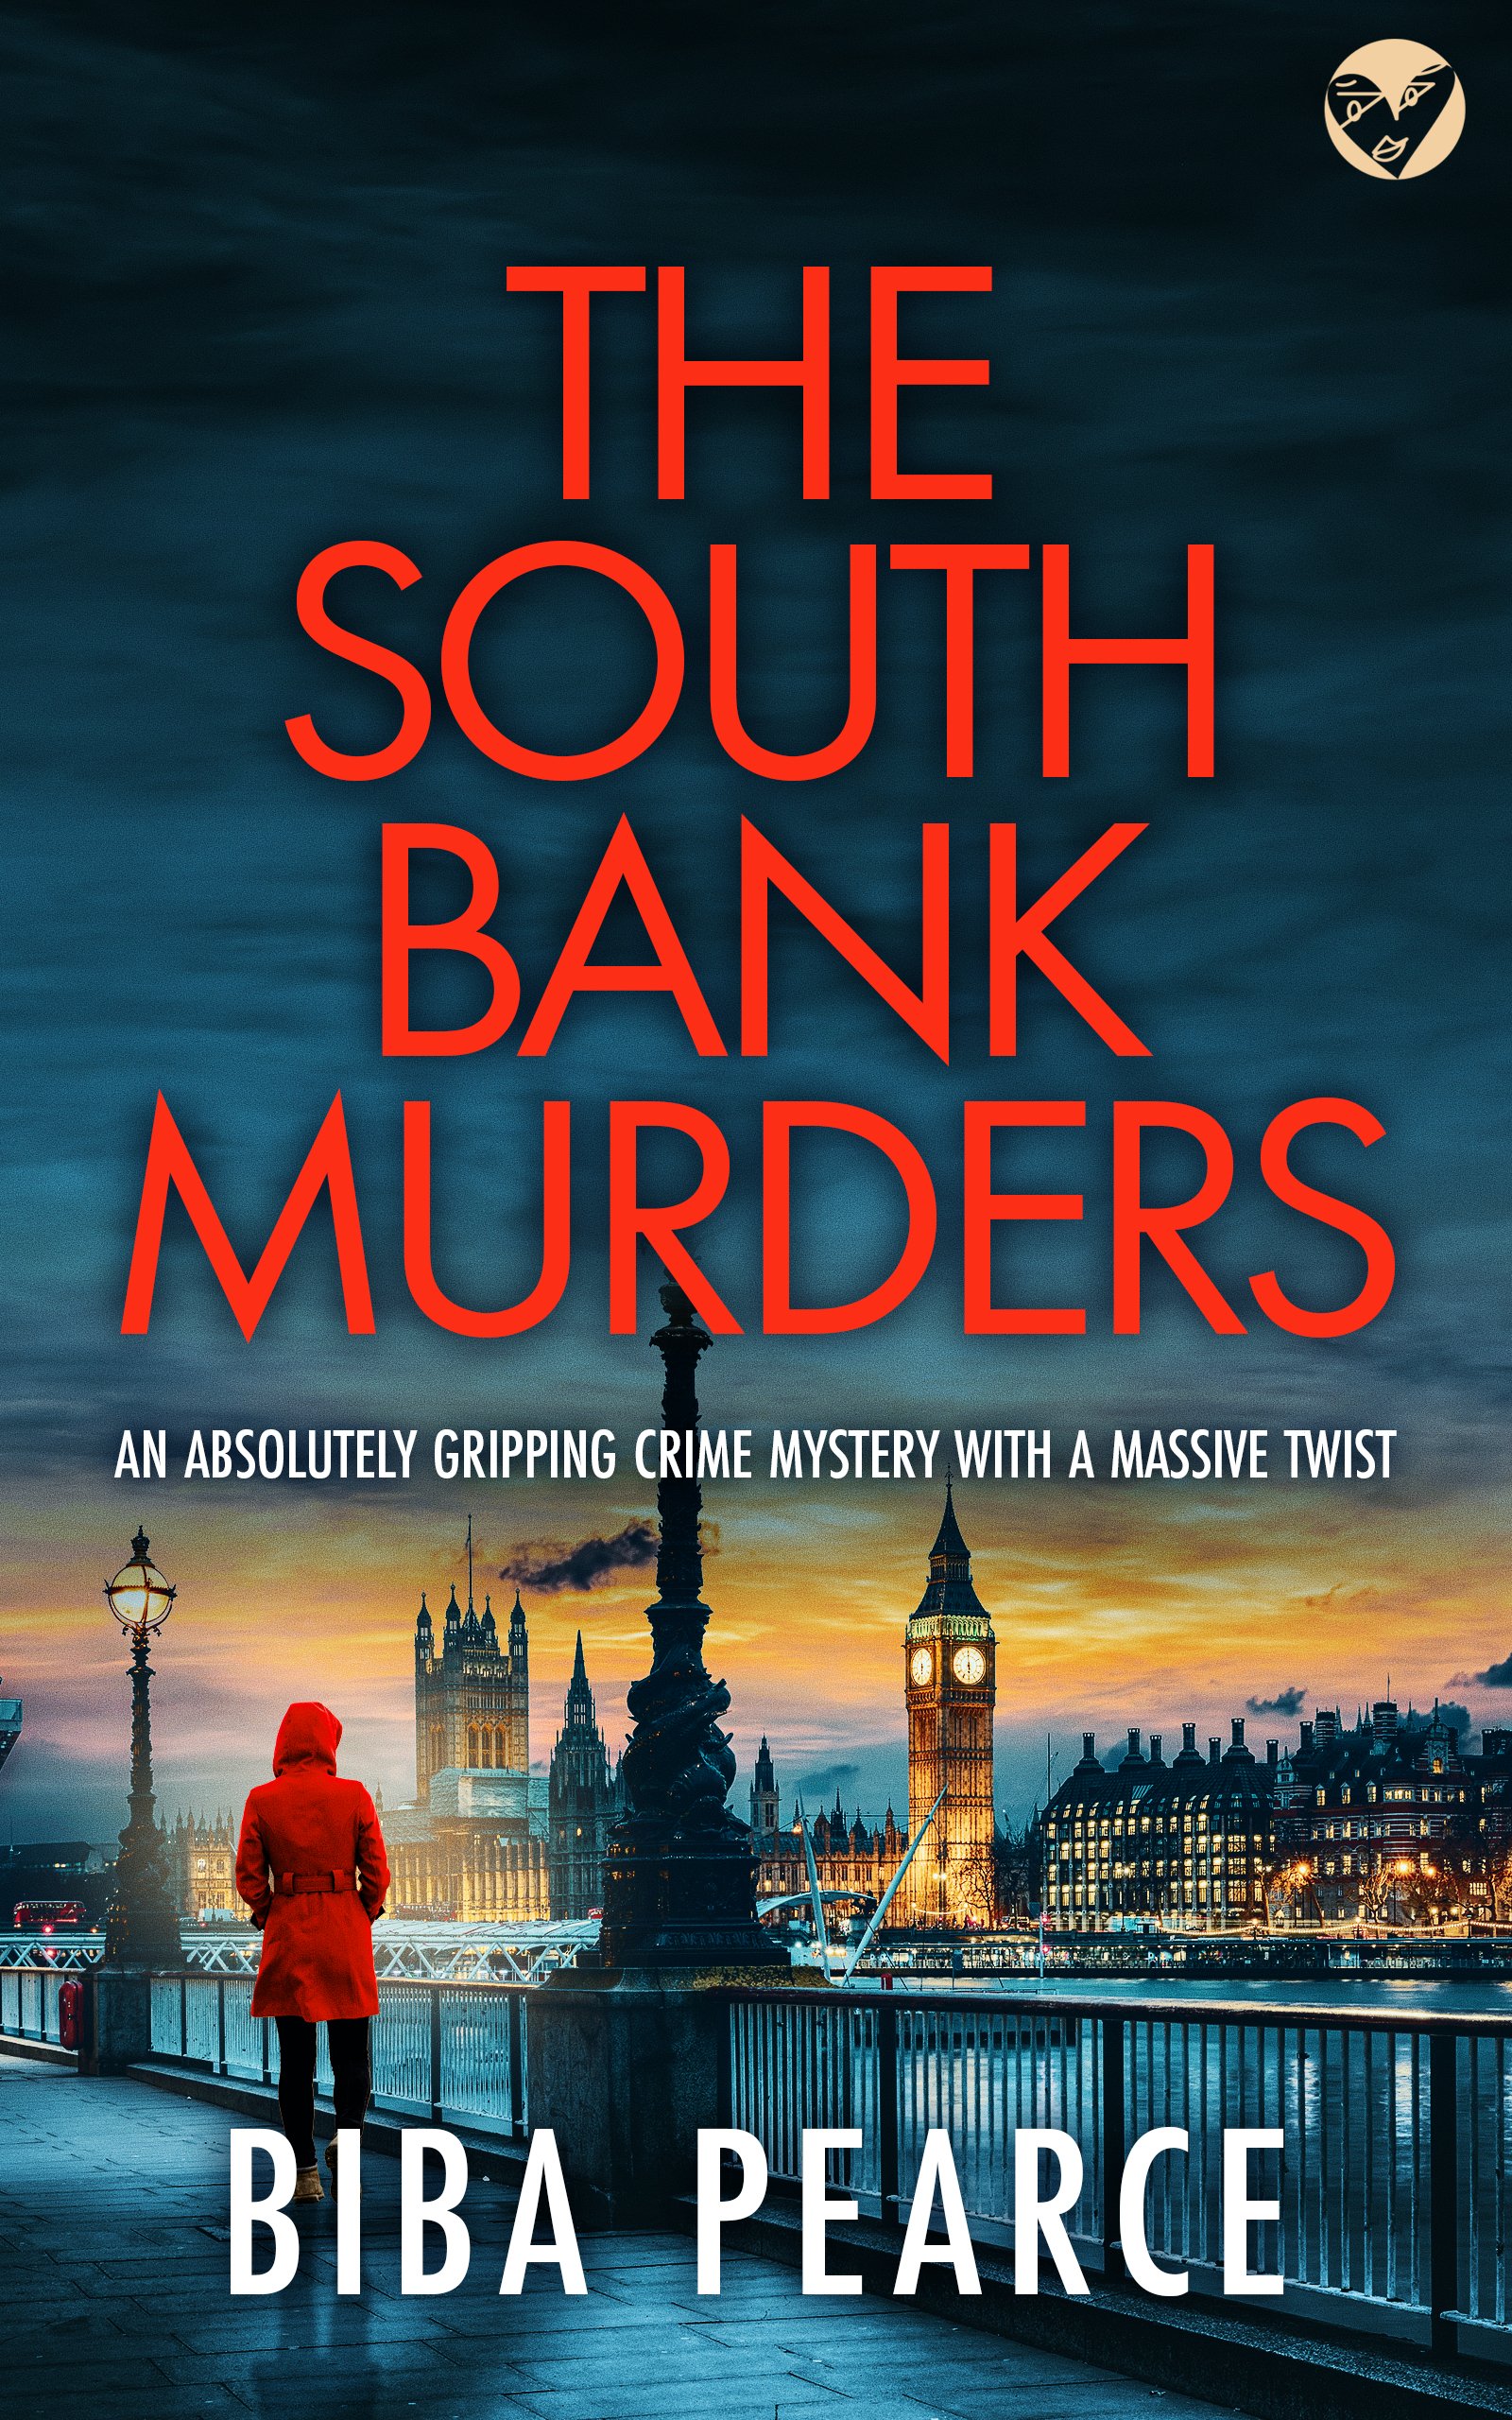 THE SOUTH BANK MURDERS publish cover.jpg